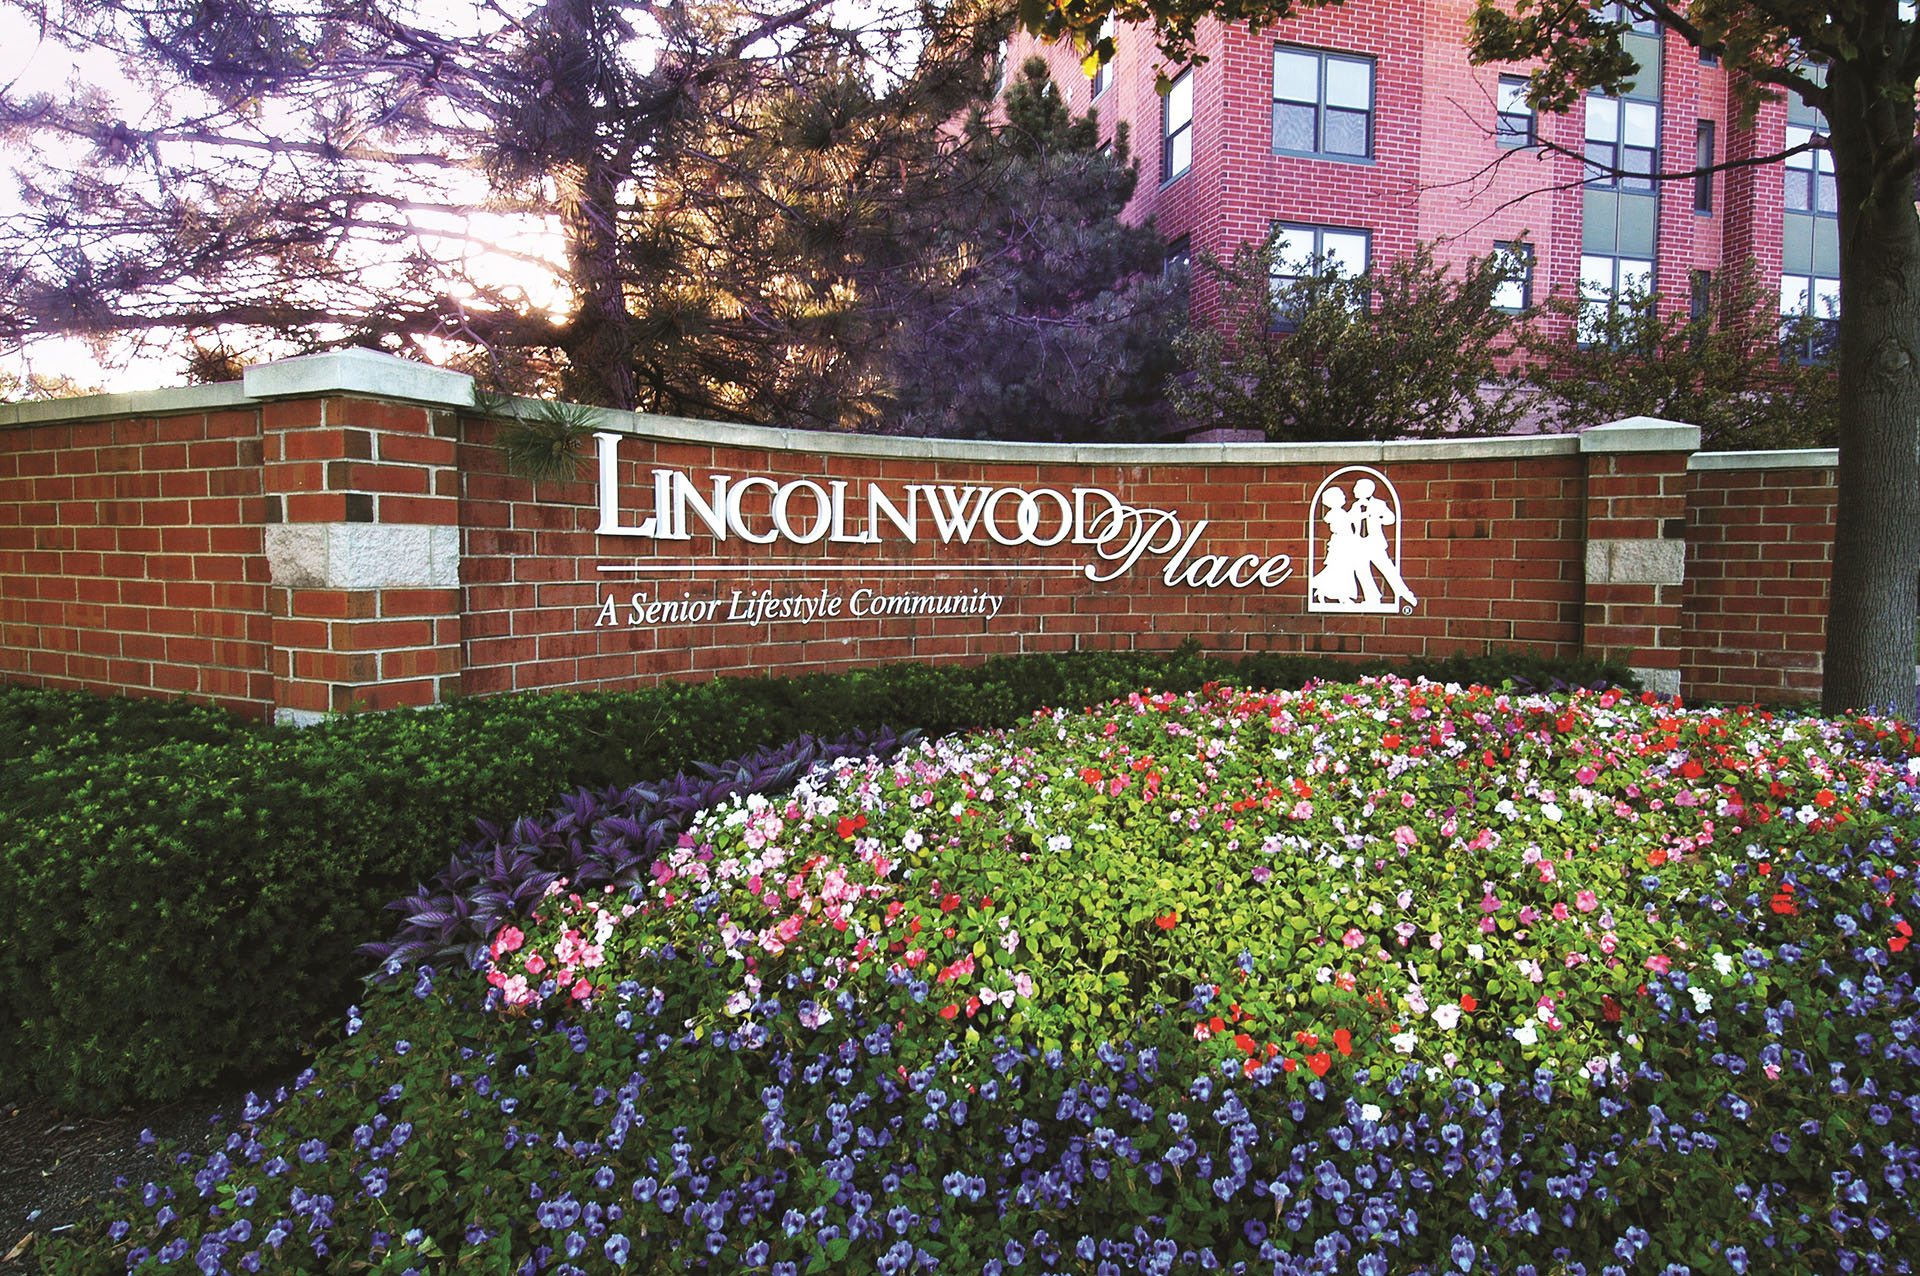 Lincolnwood place